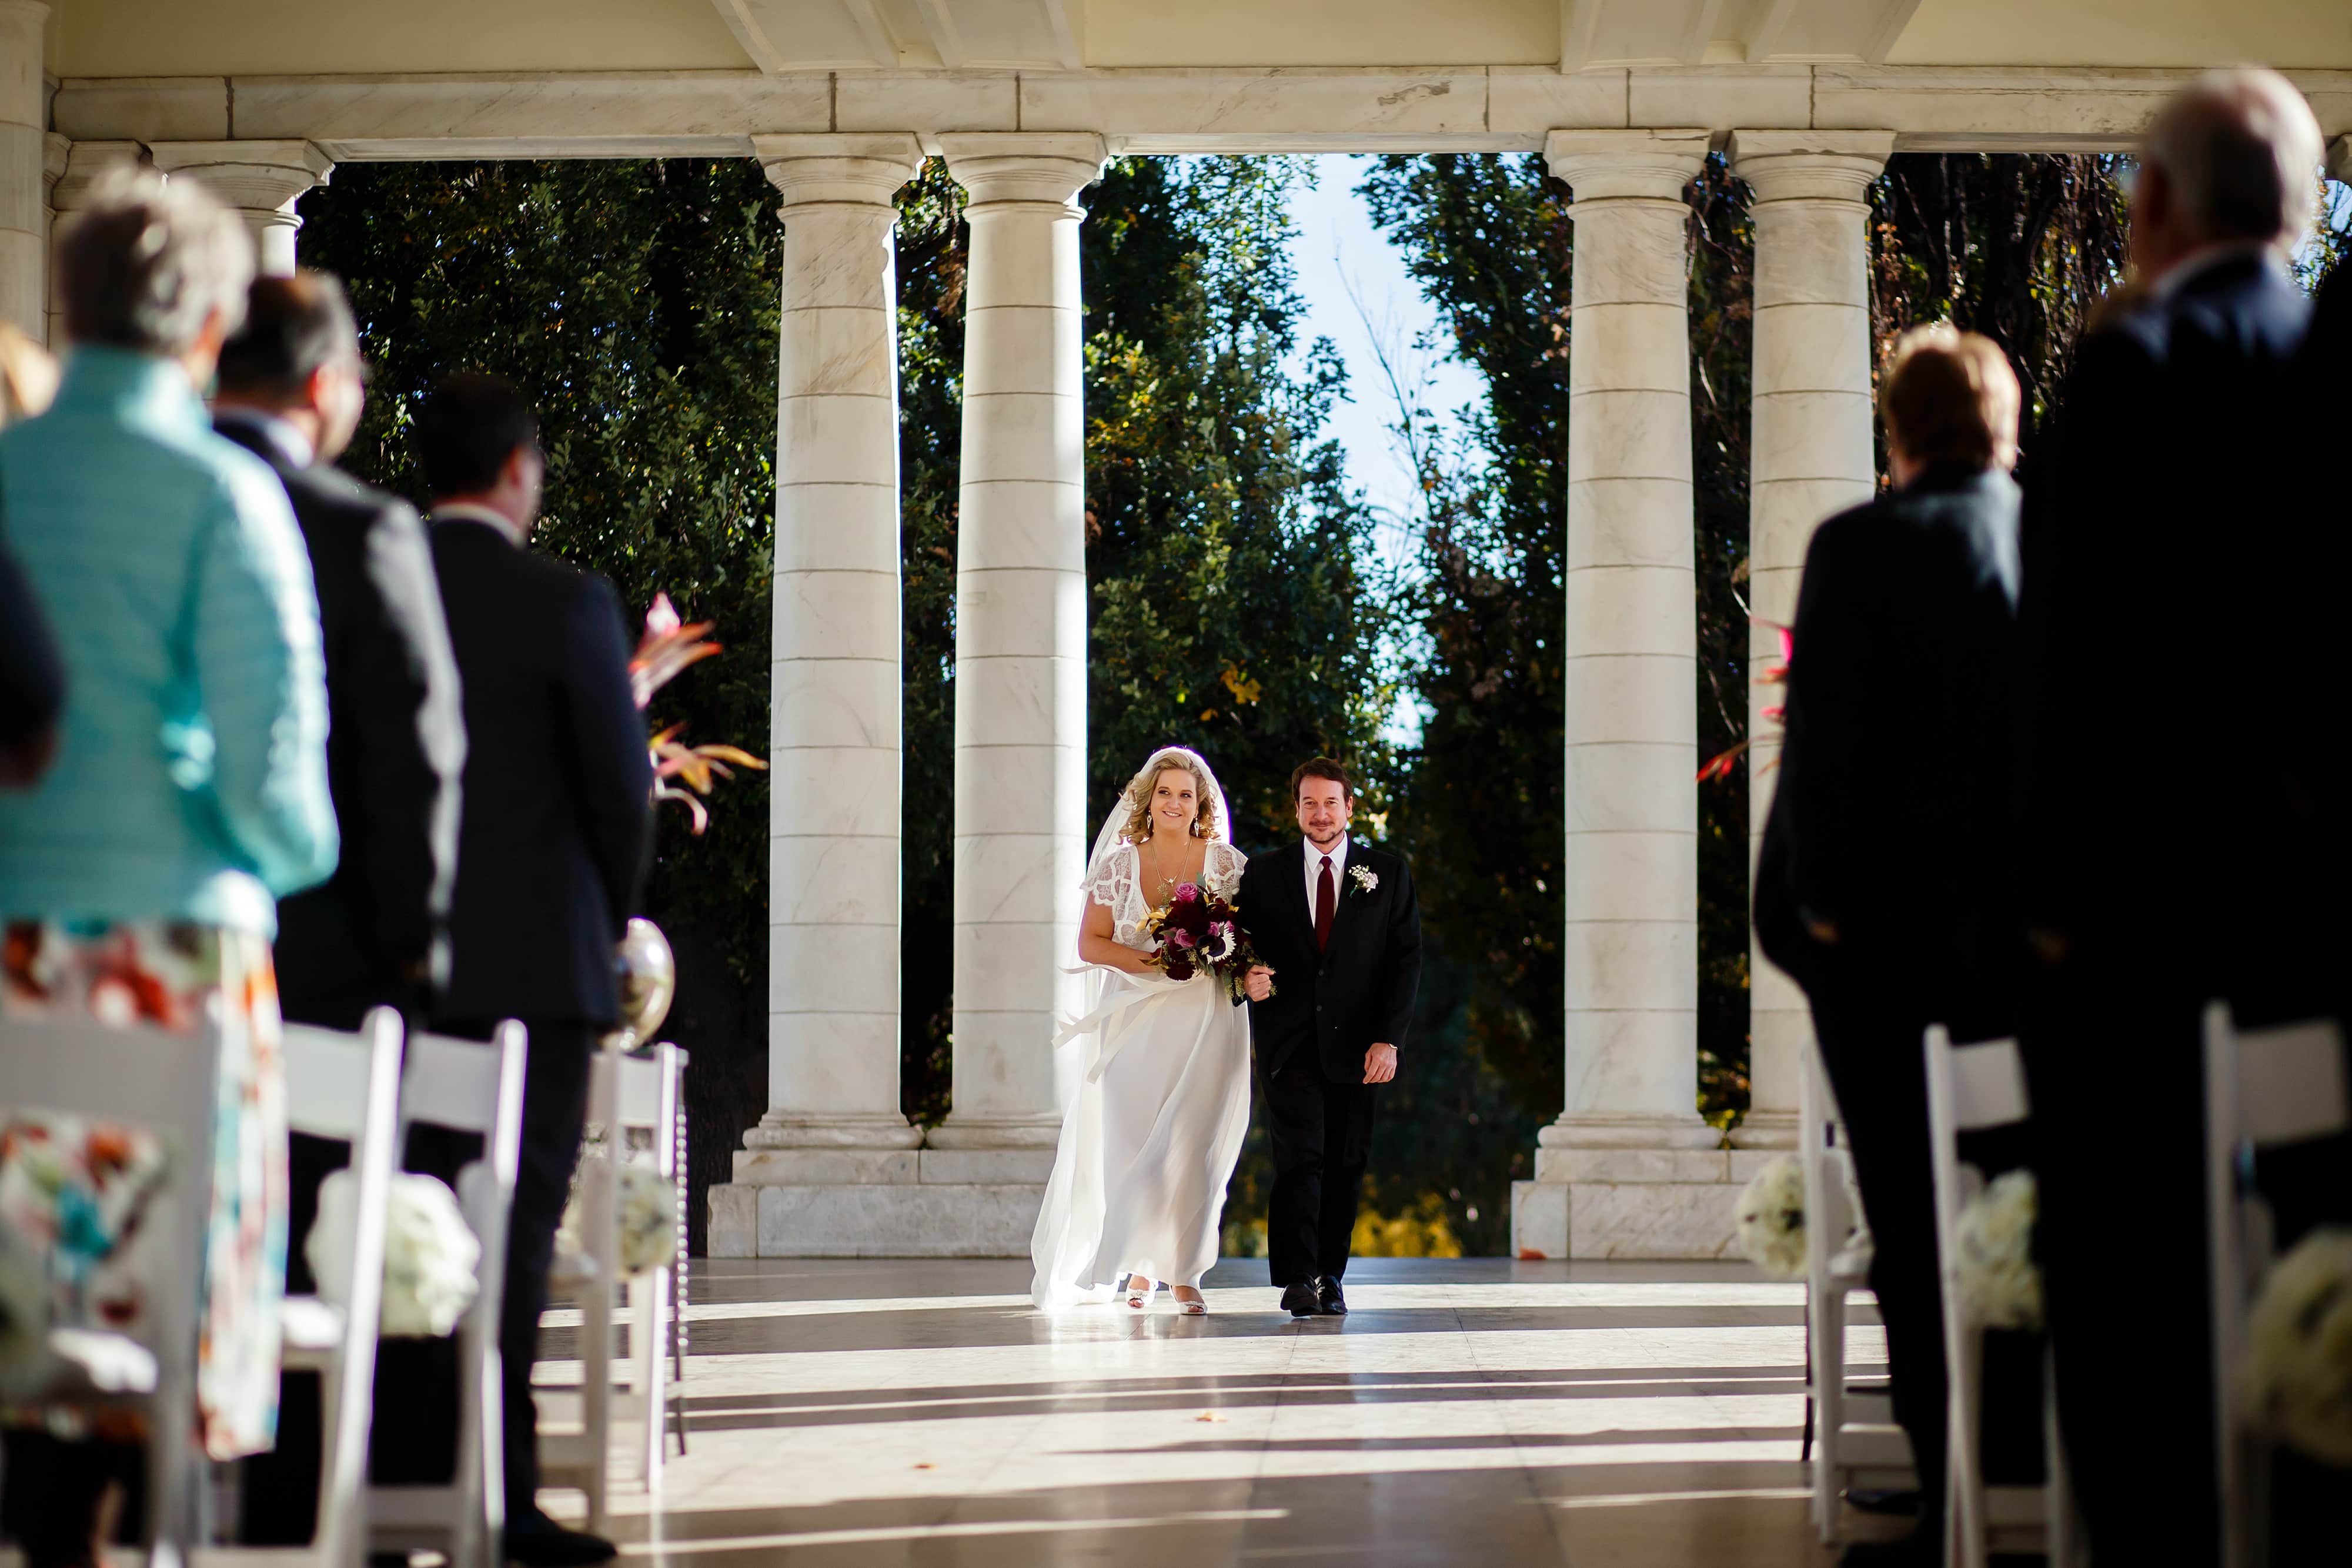 Sarah walks down the aisle with her father during her wedding at the pavillion at Cheesman Park in Denver